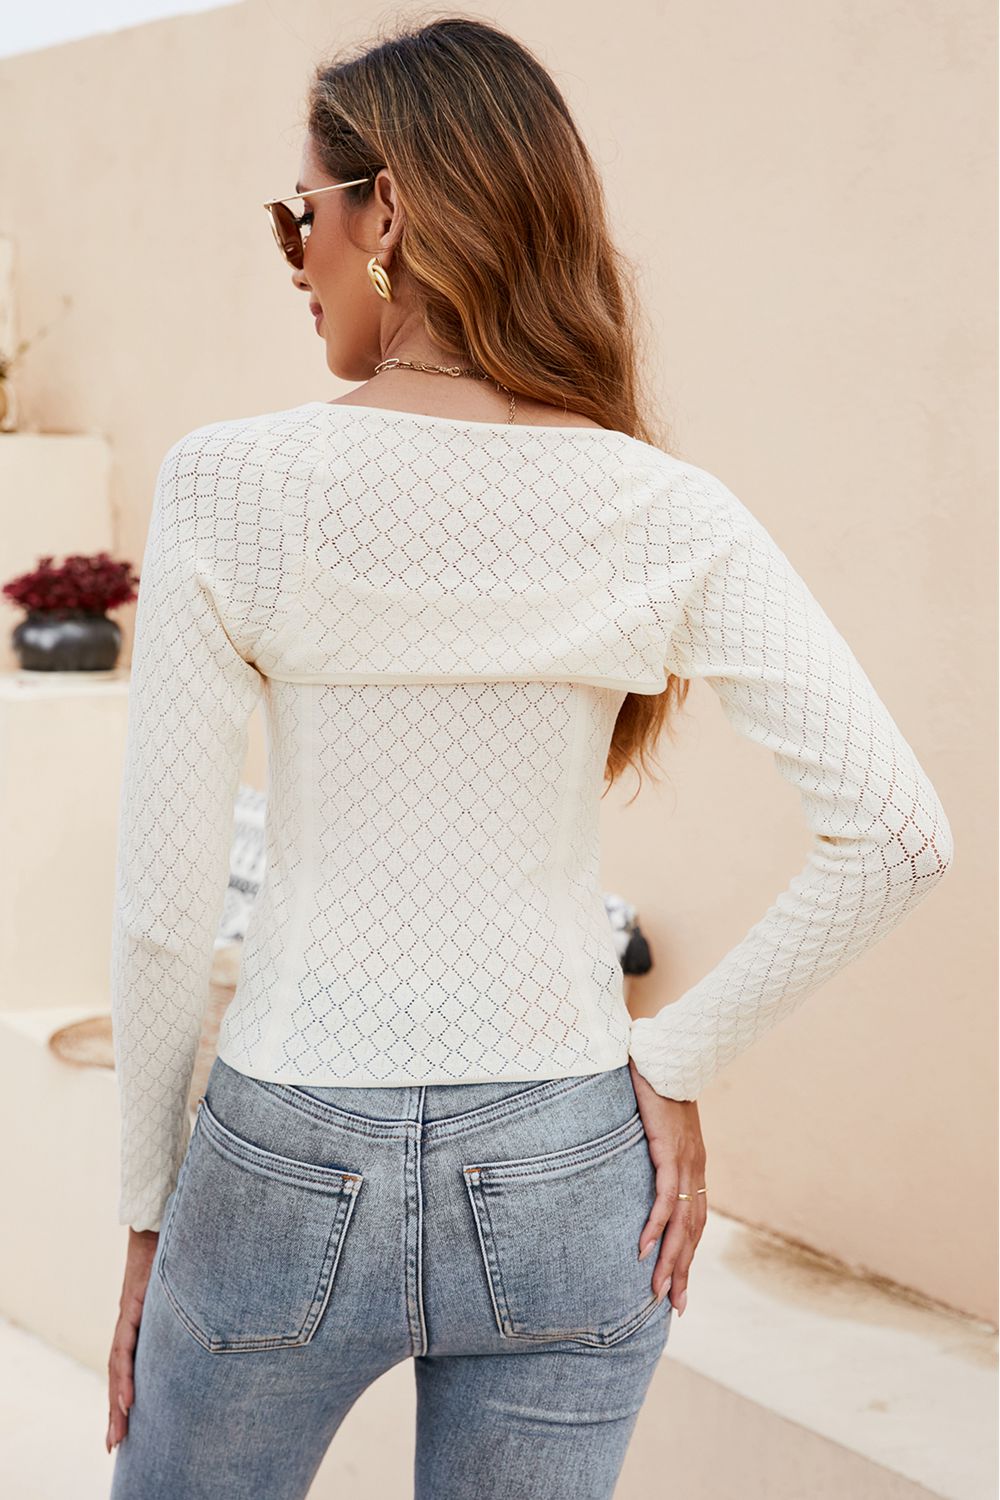 Scoop Neck Long Sleeve Knit Top - Women’s Clothing & Accessories - Shirts & Tops - 8 - 2024